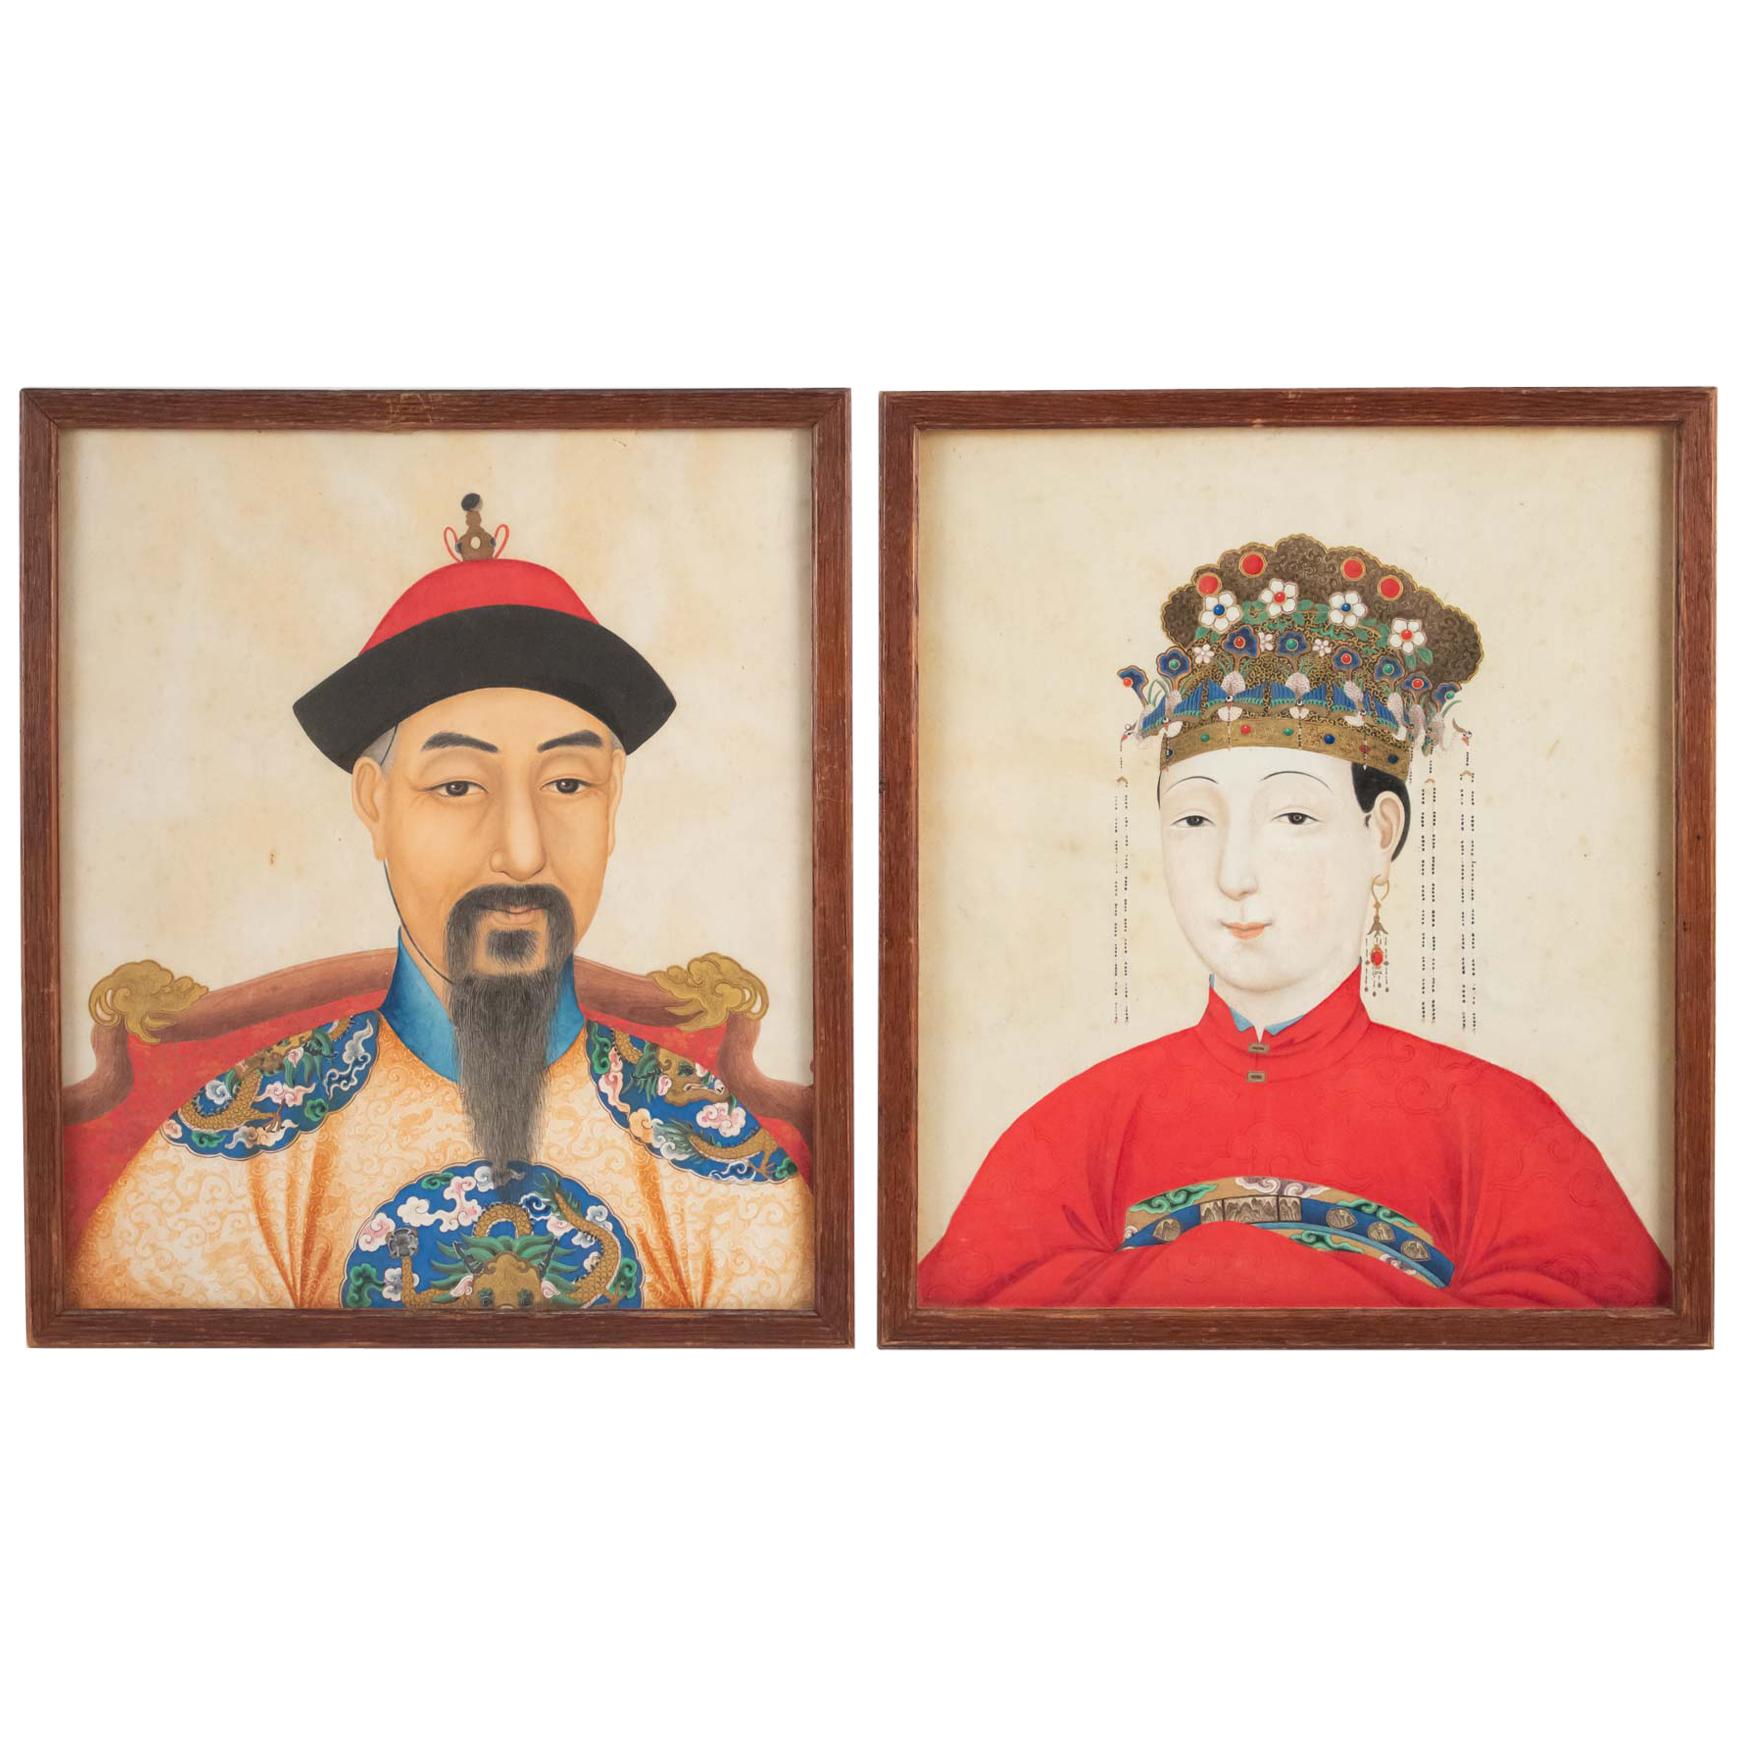 Pair of Portraits, Gouaches on Paper, Chinese Dignitary and His Husband